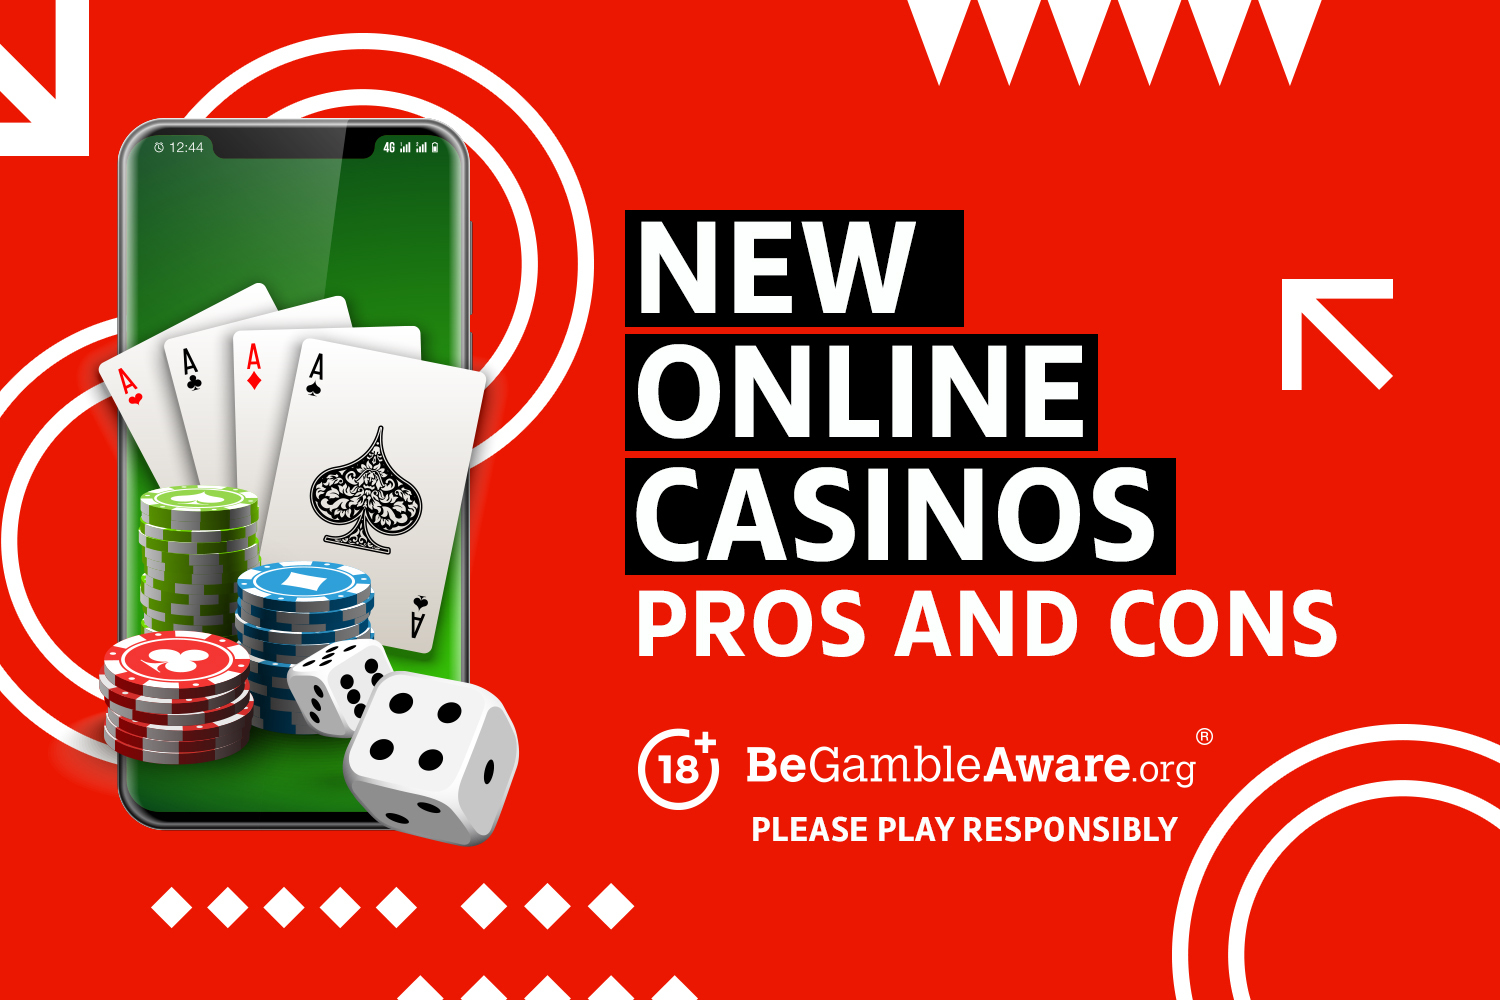 New online casinos pros and cons. BeGambleAware.org - please play responsibly.